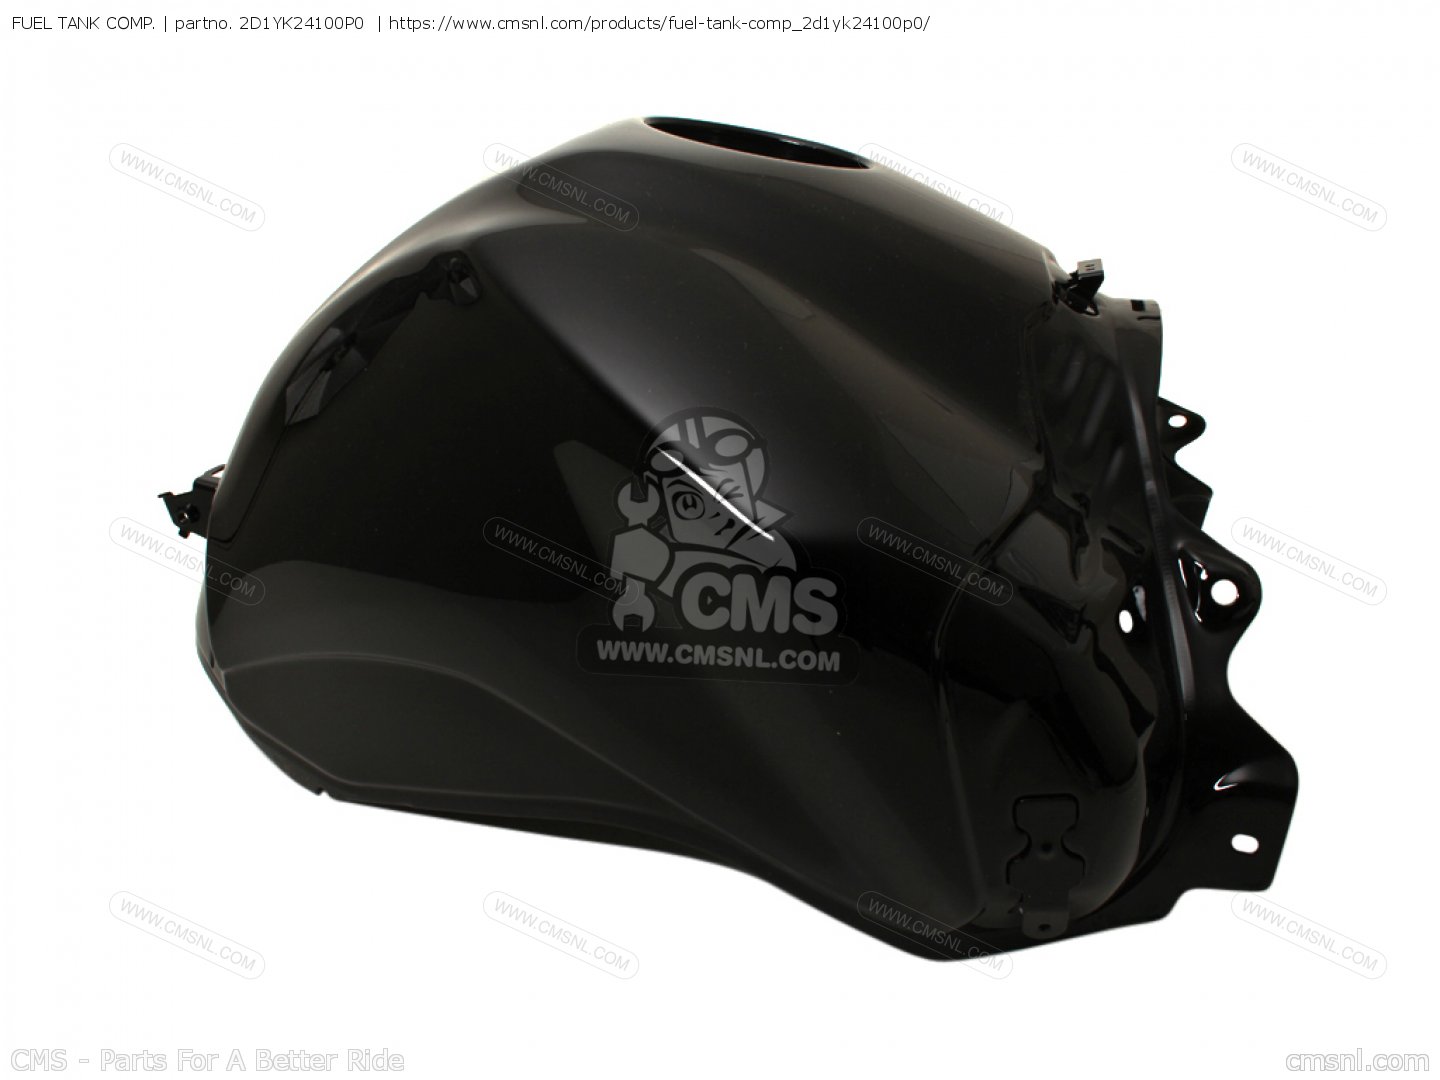 FUEL TANK COMP. for FZ1-N 2007 2D14 EUROPE 1F2D1-332G1 order at CMSNL